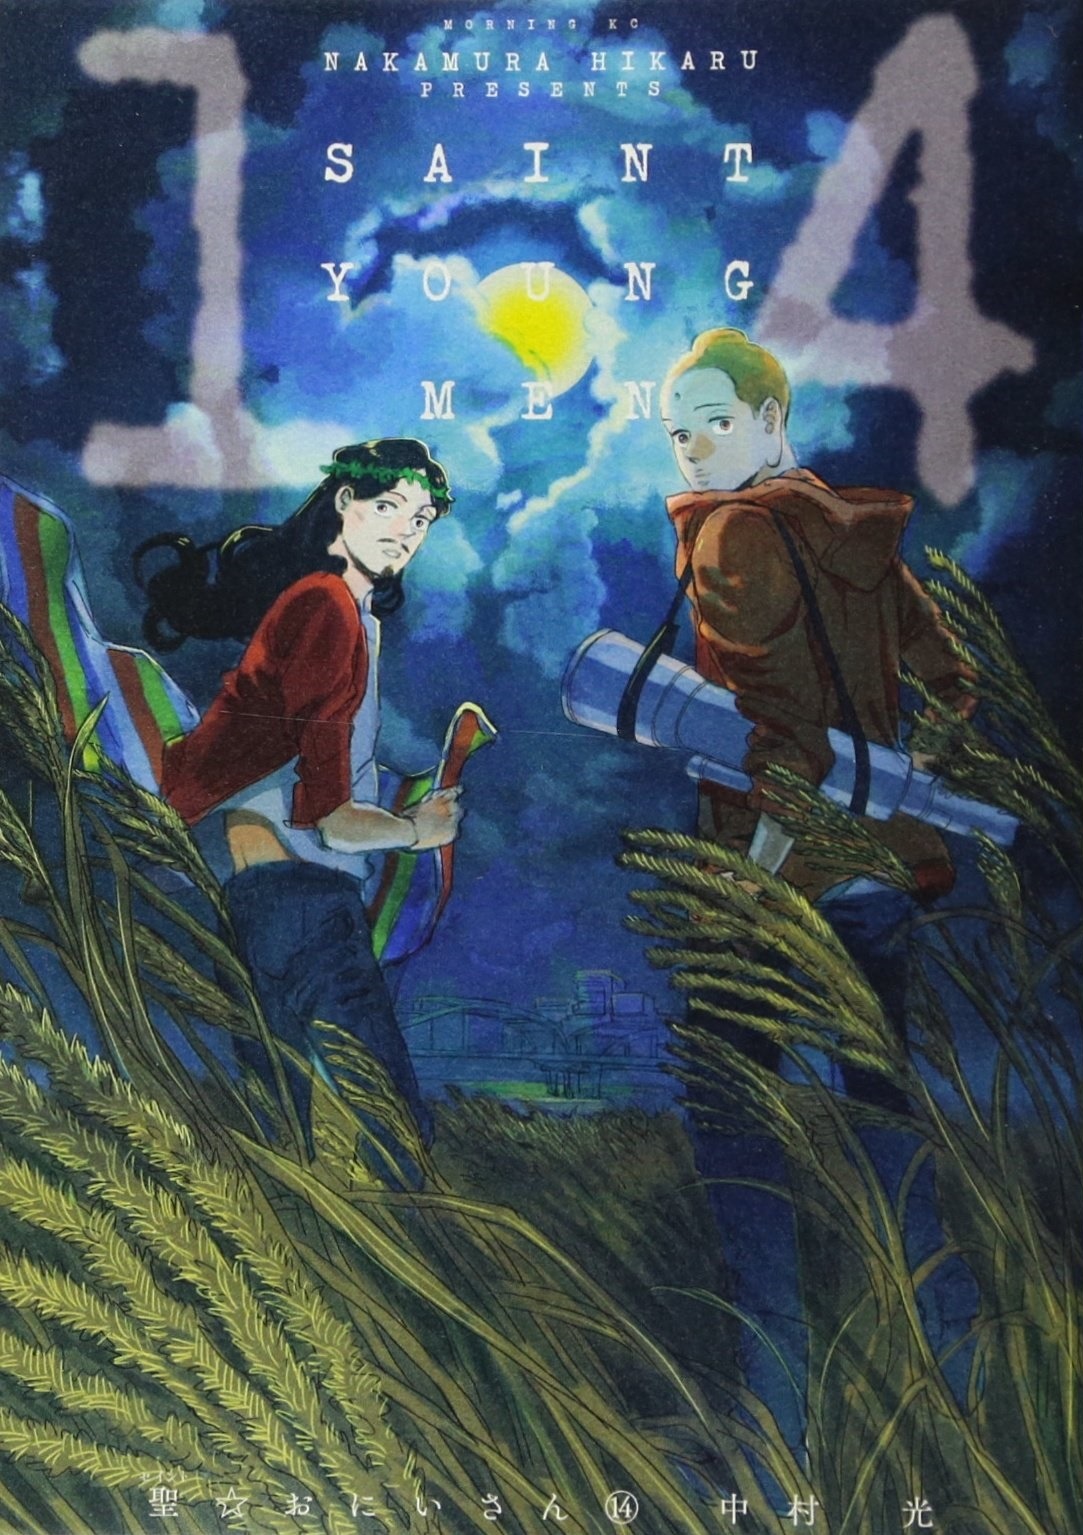 Saint Onii-san Manga Has ‘Important Announcement’ in February
This year’s March issue of Kodansha’s Morning Two magazine revealed on Monday that Hikaru Nakamura’s Saint Young Men (Saint Onii-san) manga will have an “important announcement” in the...